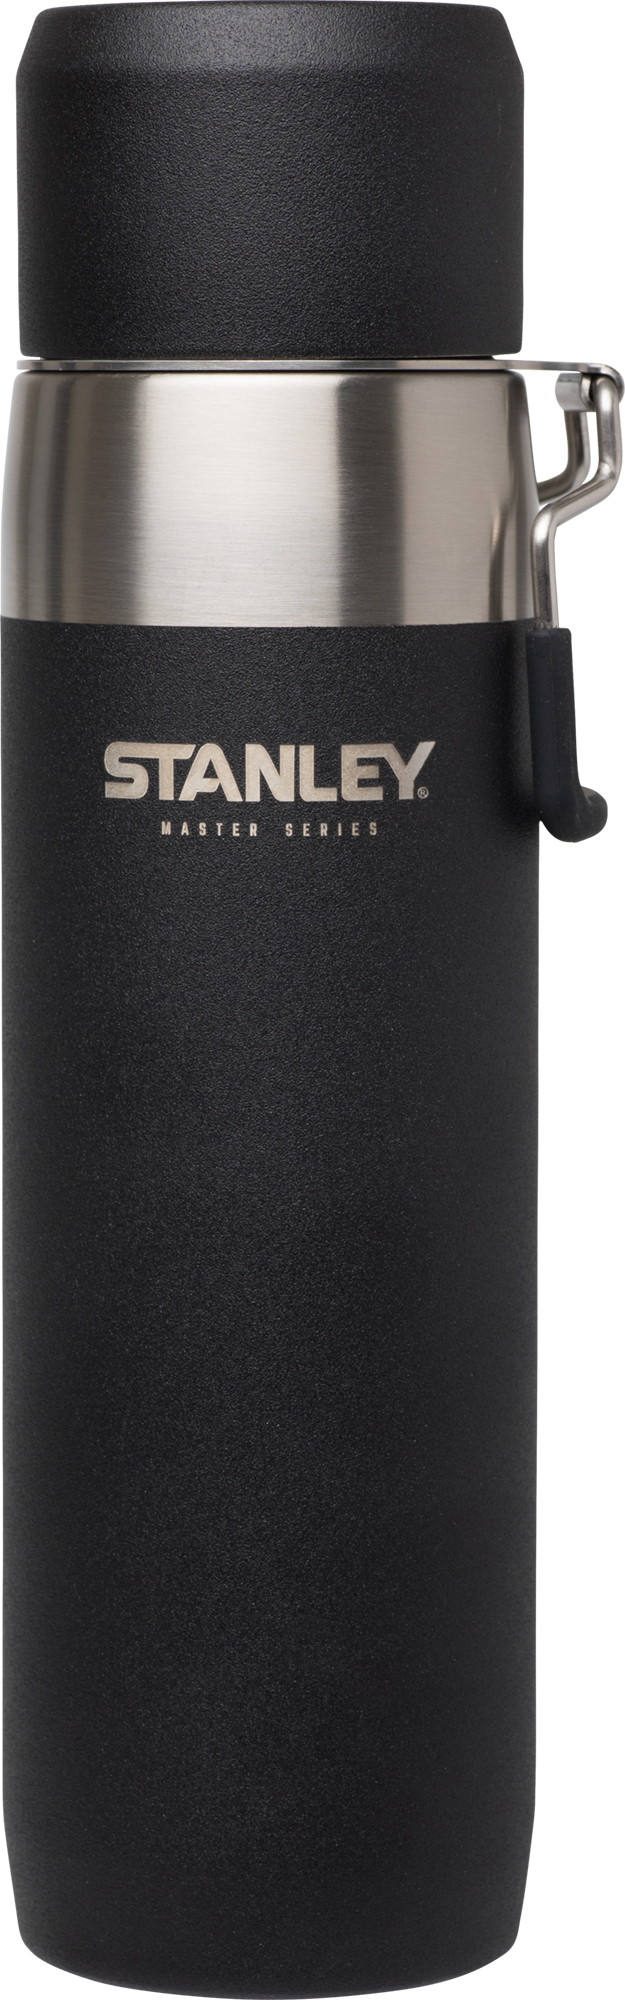 Master Thermal water bottle - Stanley 10-03105-002